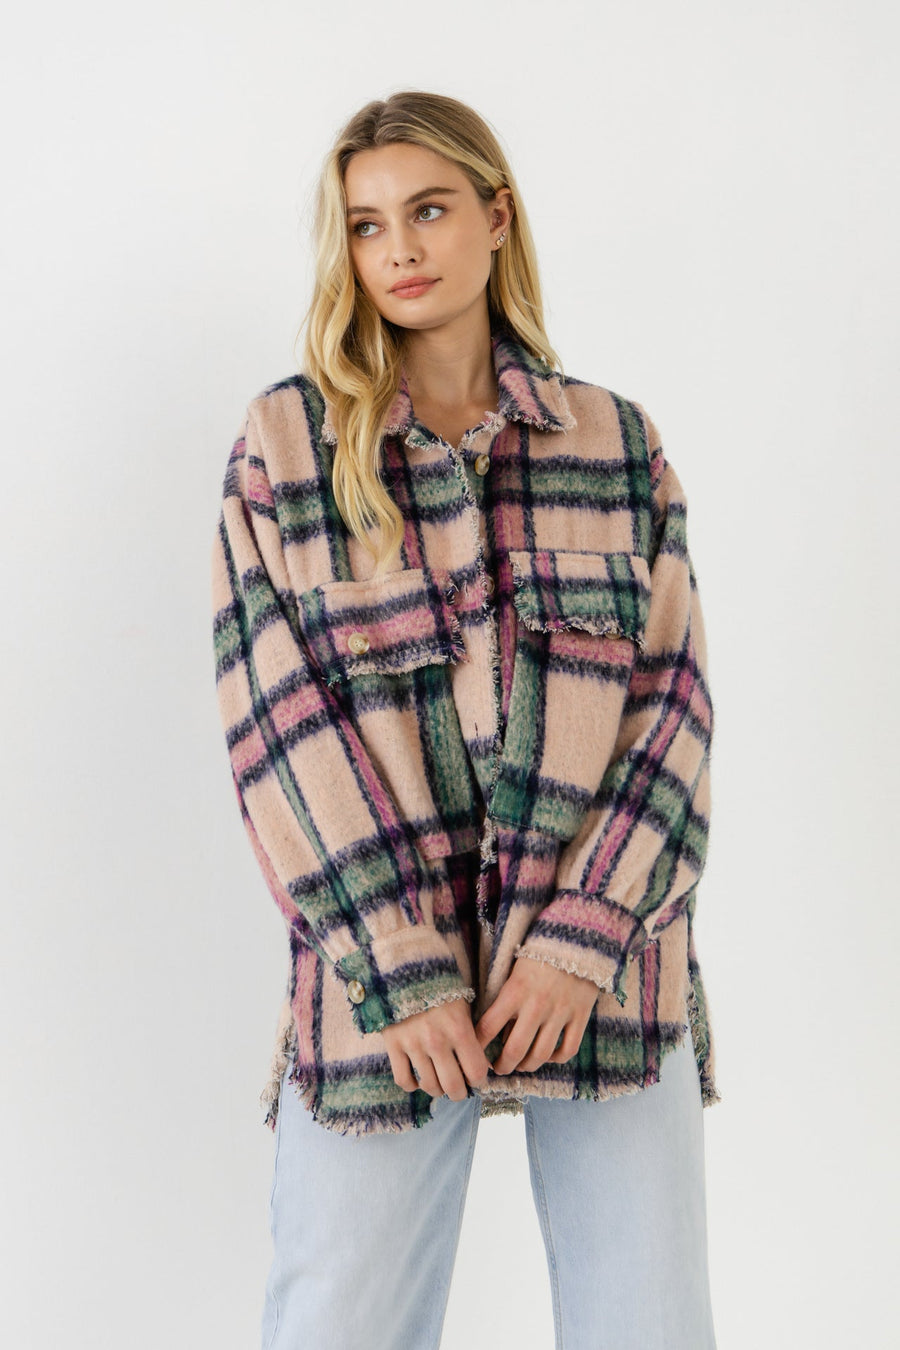 FREE THE ROSES-Oversized Plaid Coat with Raw Edges-JACKETS available at Objectrare